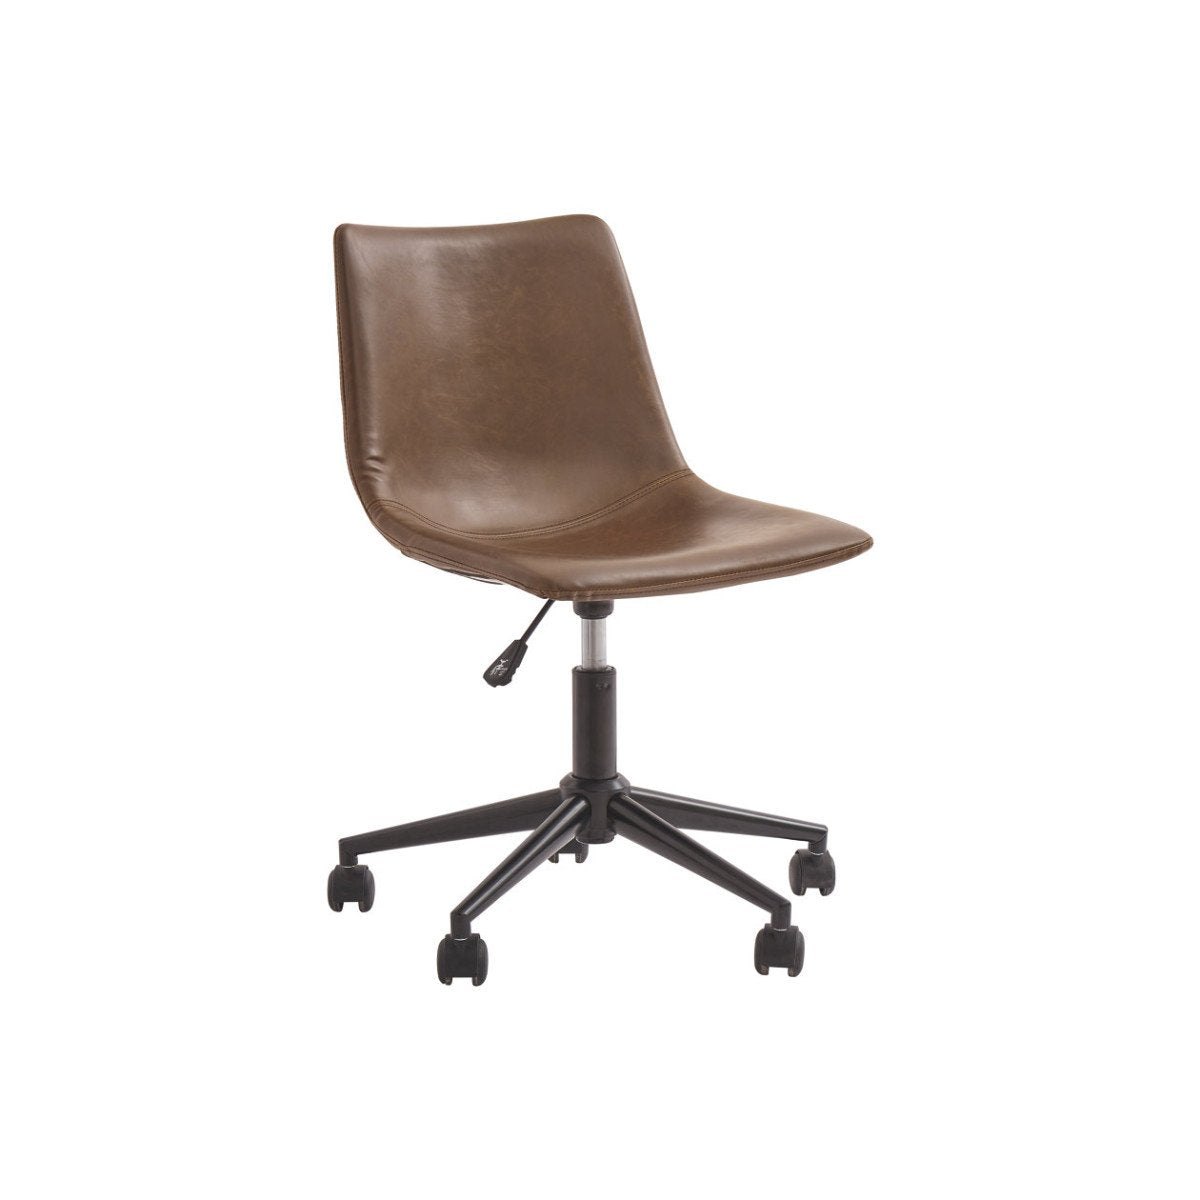 BM190090 - Metal Swivel Chair with Faux Leather Upholstery and Adjustable Seat, Brown and Black